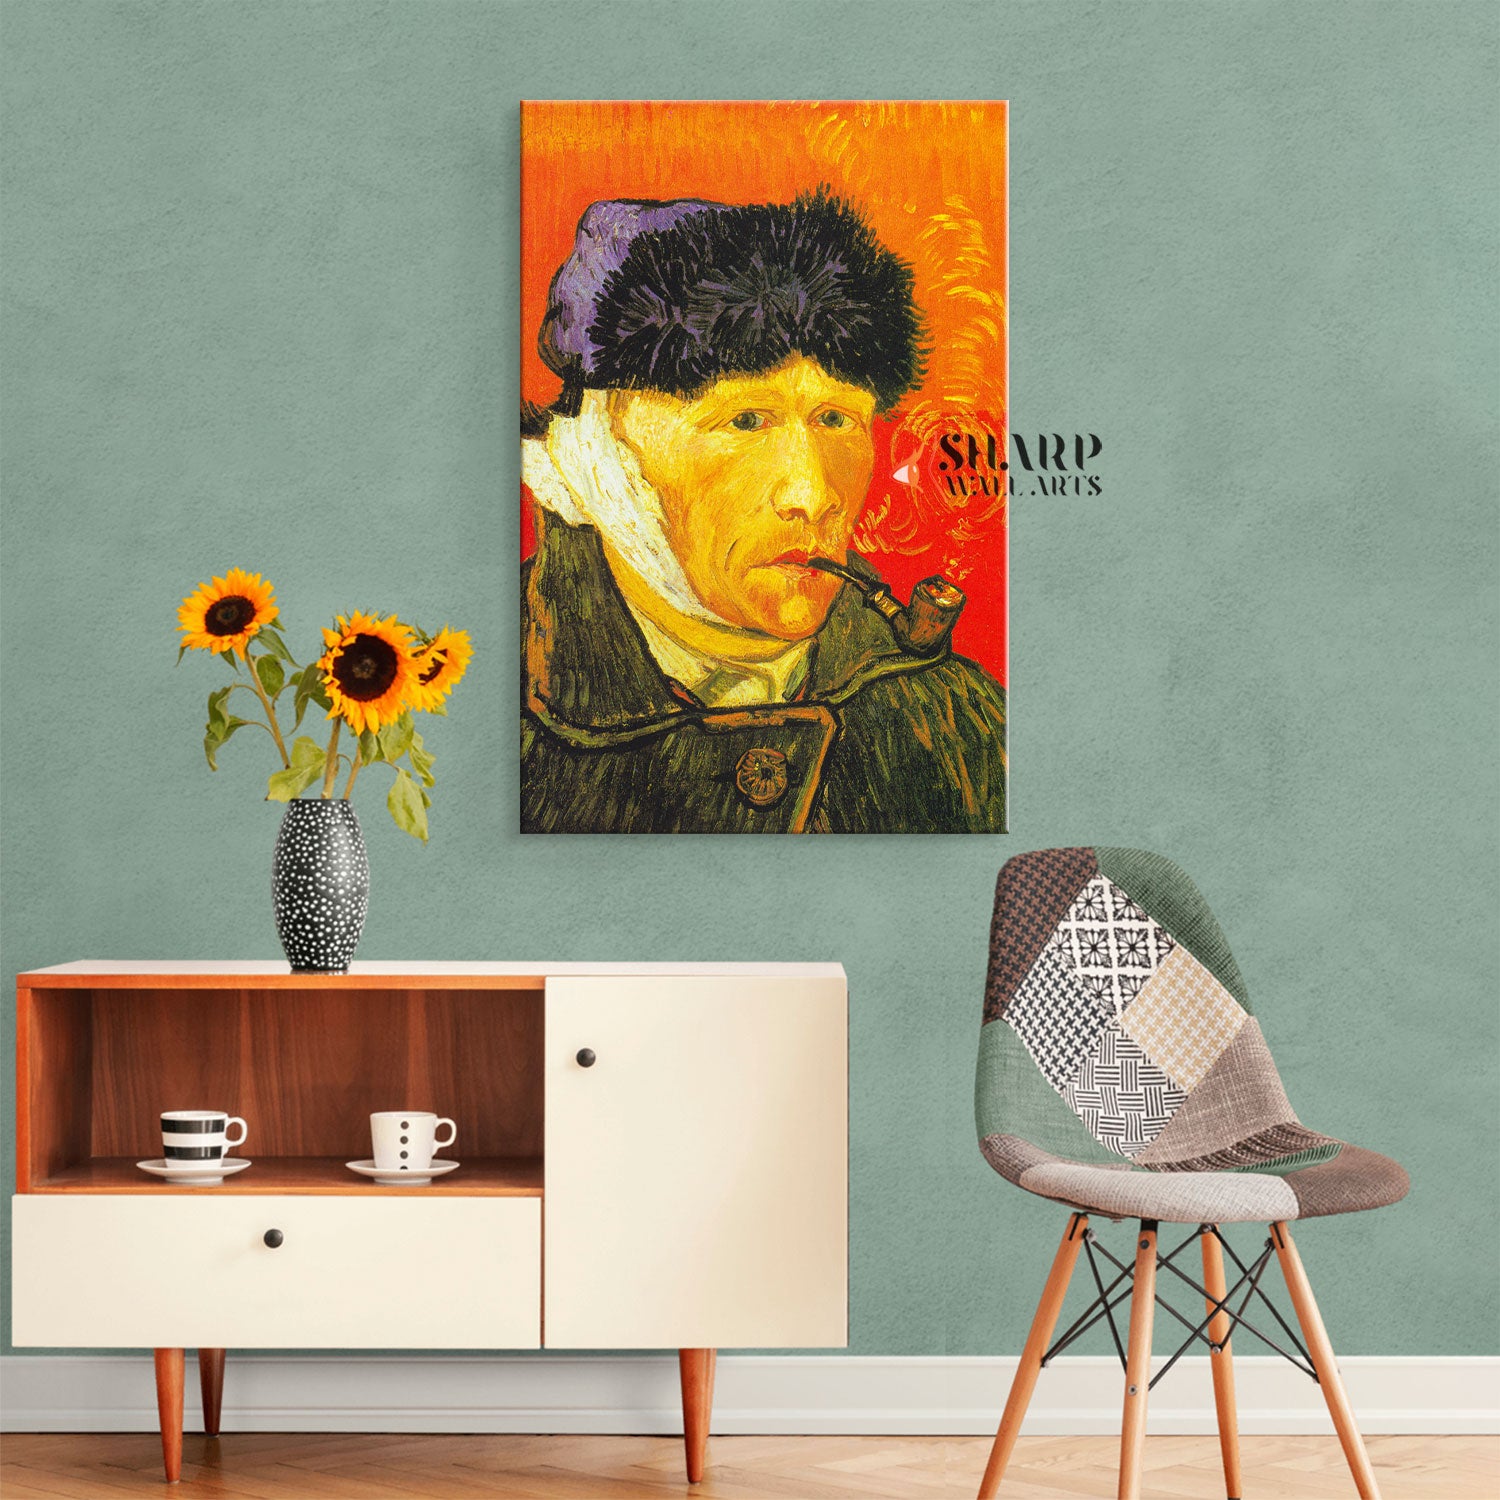 Vincent van Gogh Self-Portrait With Bandaged Ear And Pipe Canvas Wall Art